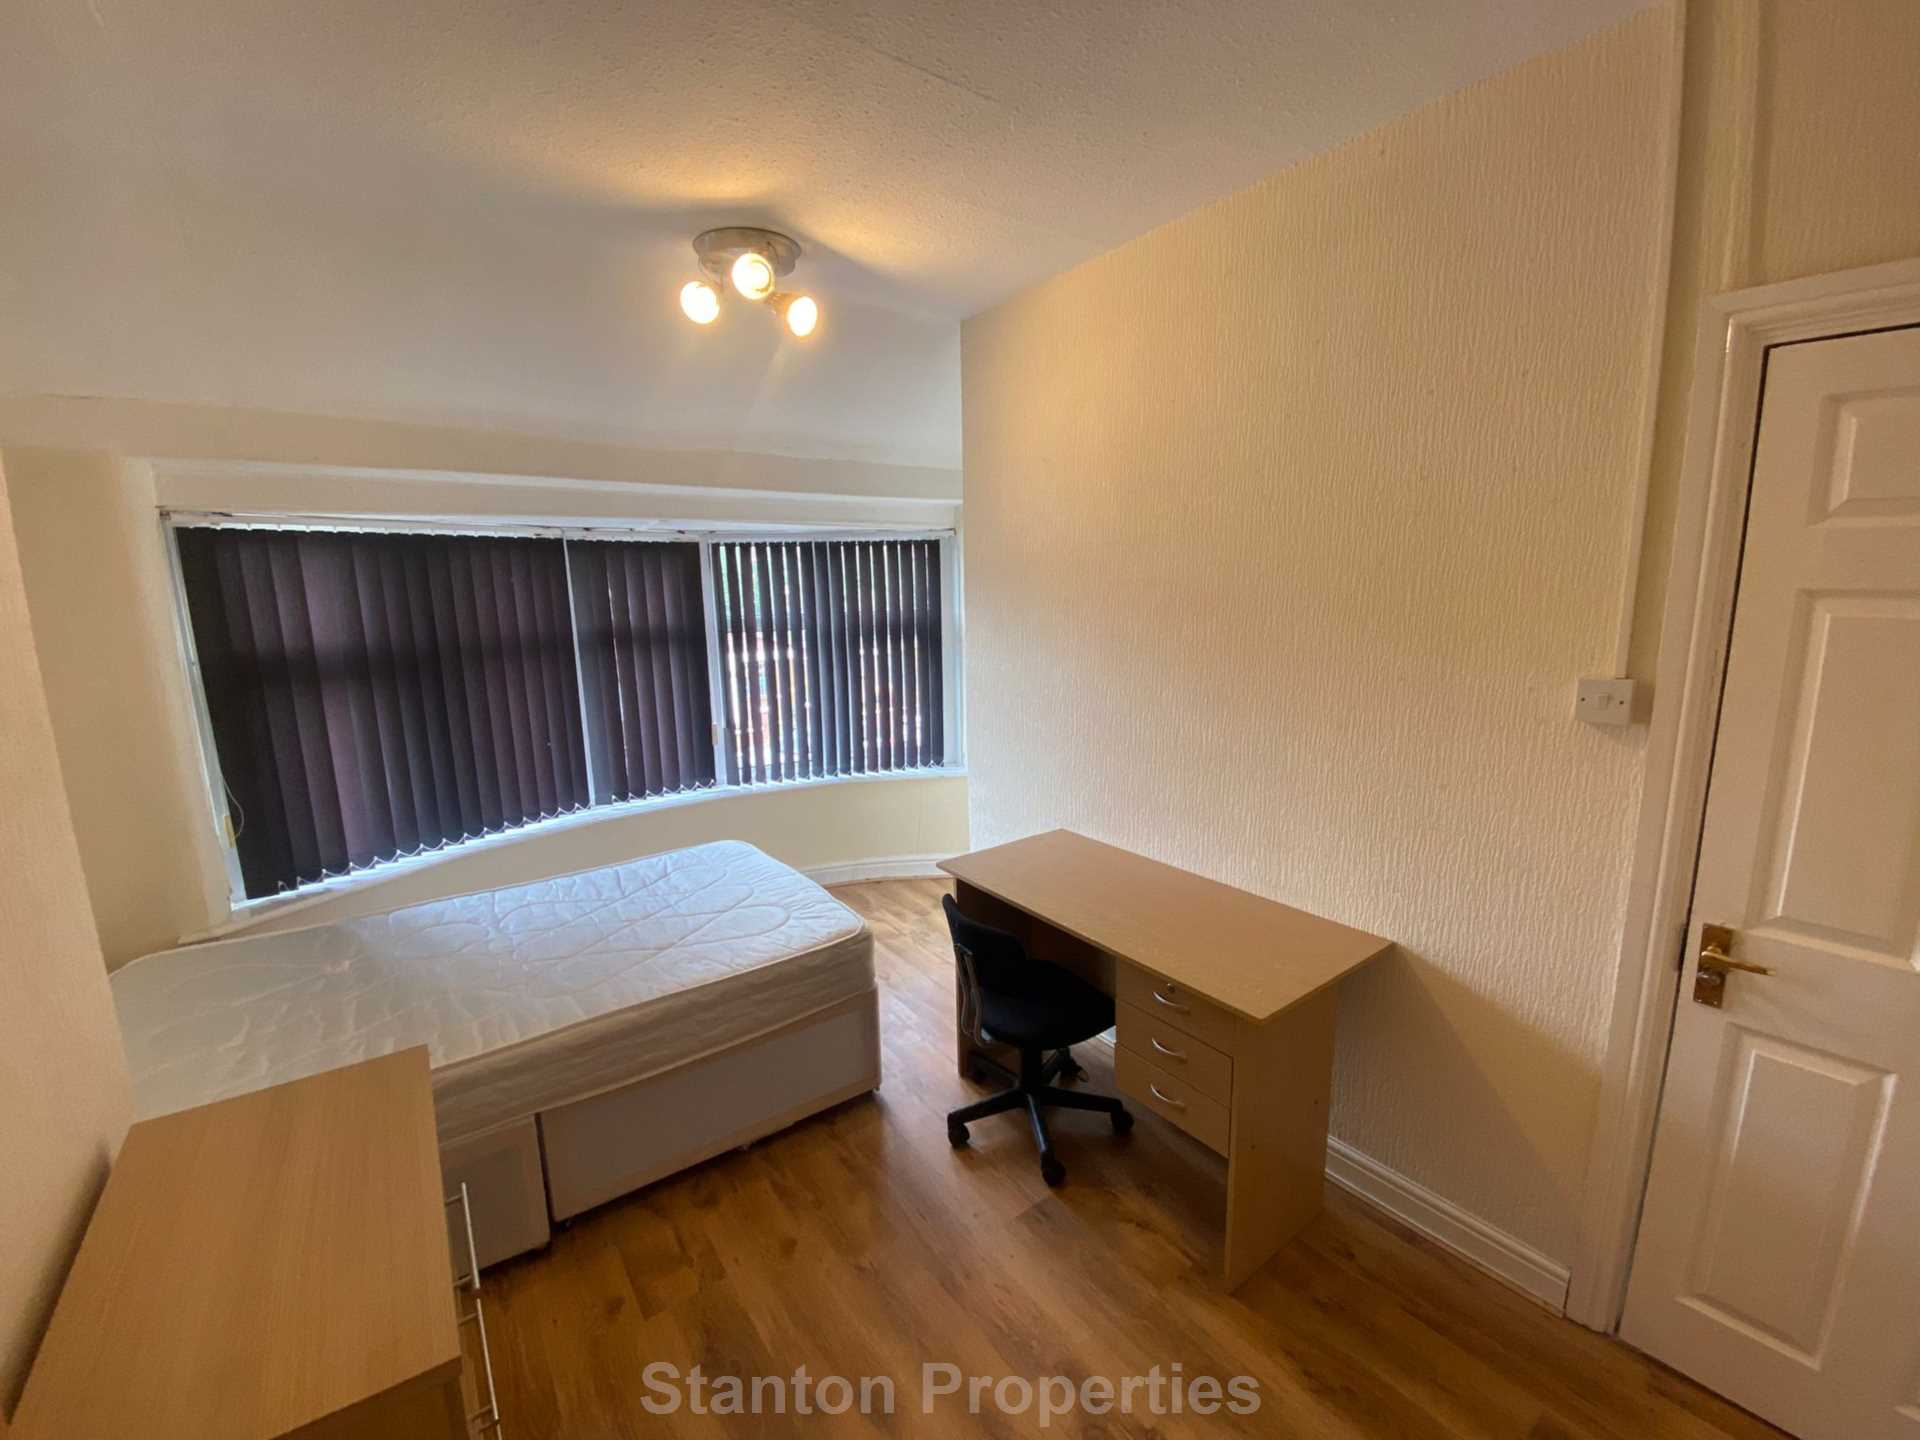 £120 pppw, Weld Road, Withington, Image 10